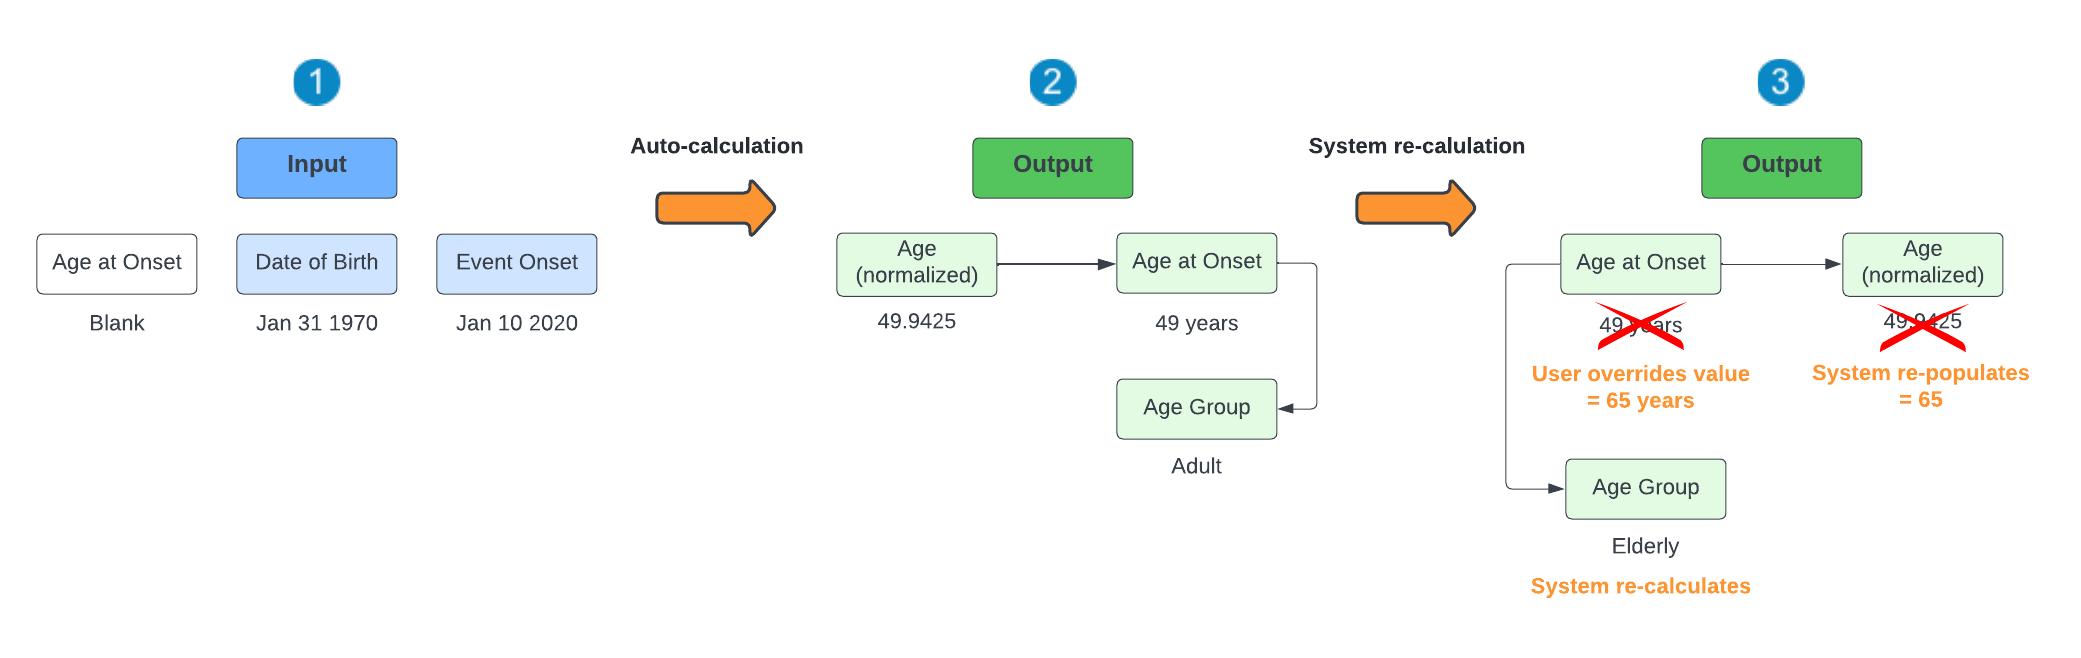 Age (normalized) and Age at Onset Scenario C